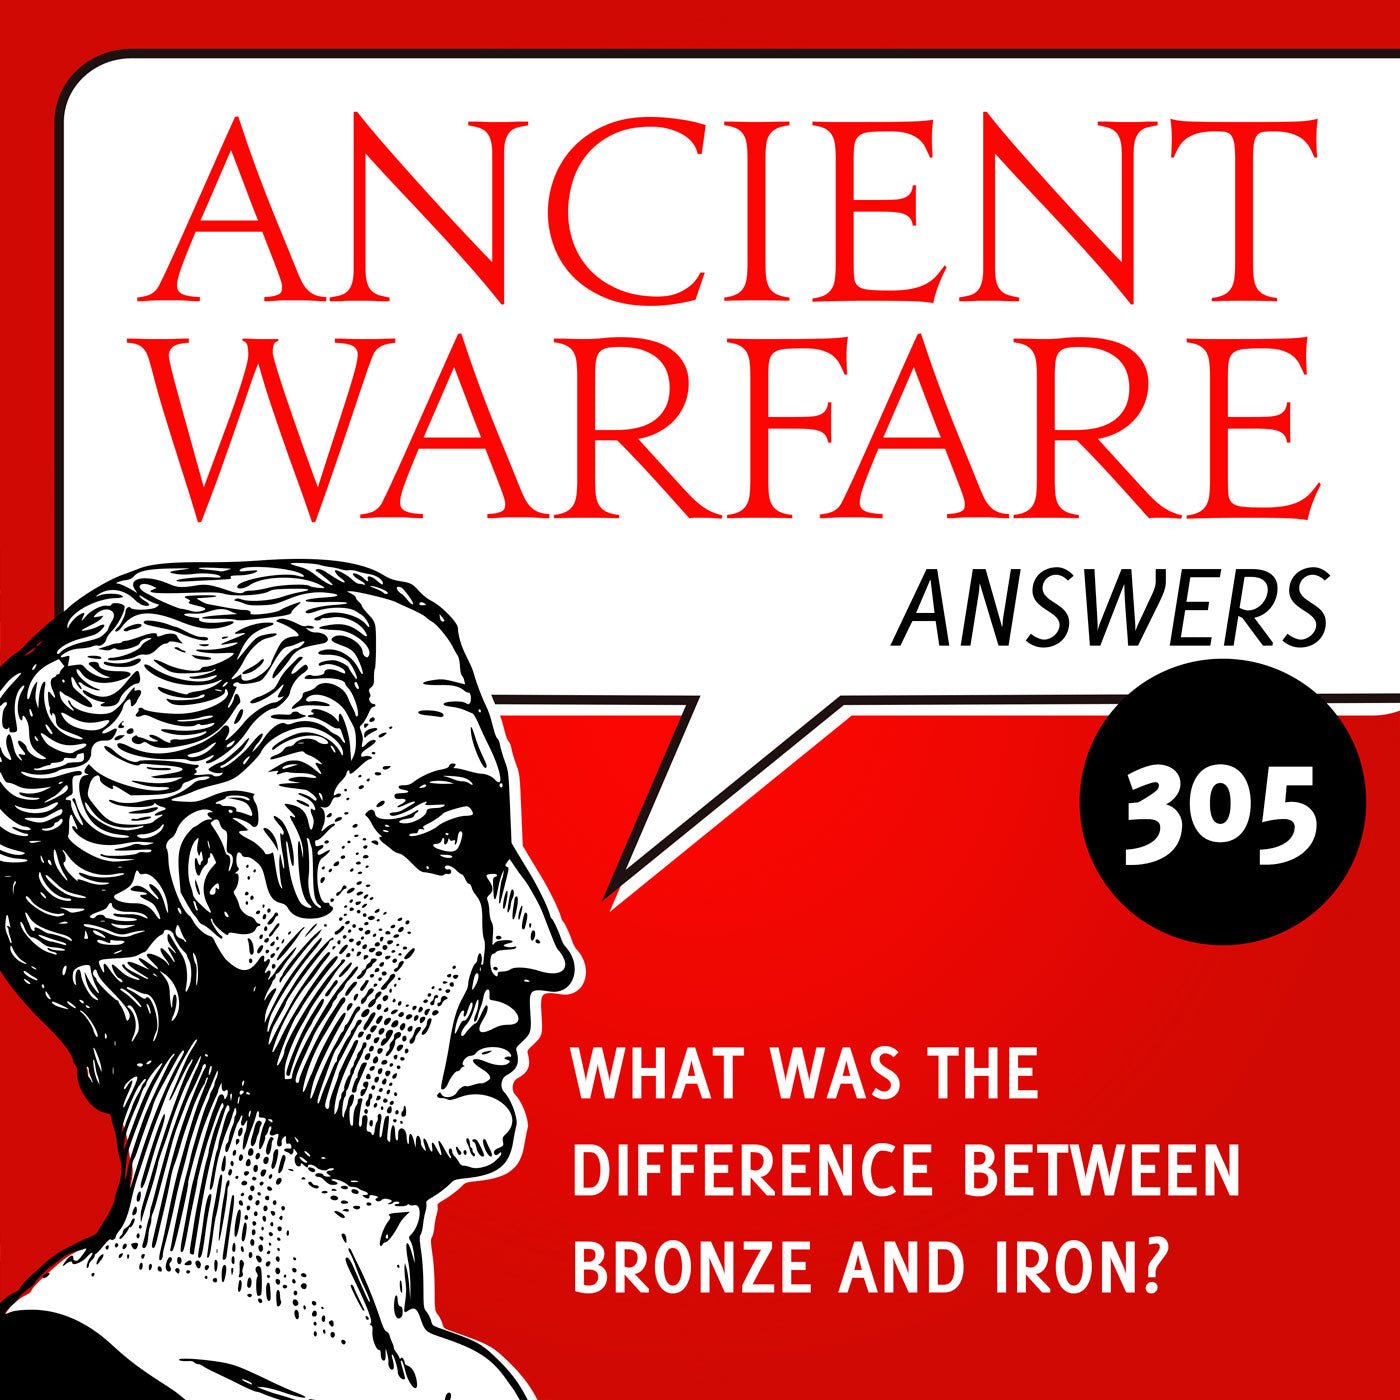 Ancient Warfare Answers (305): What was the difference between bronze and iron?